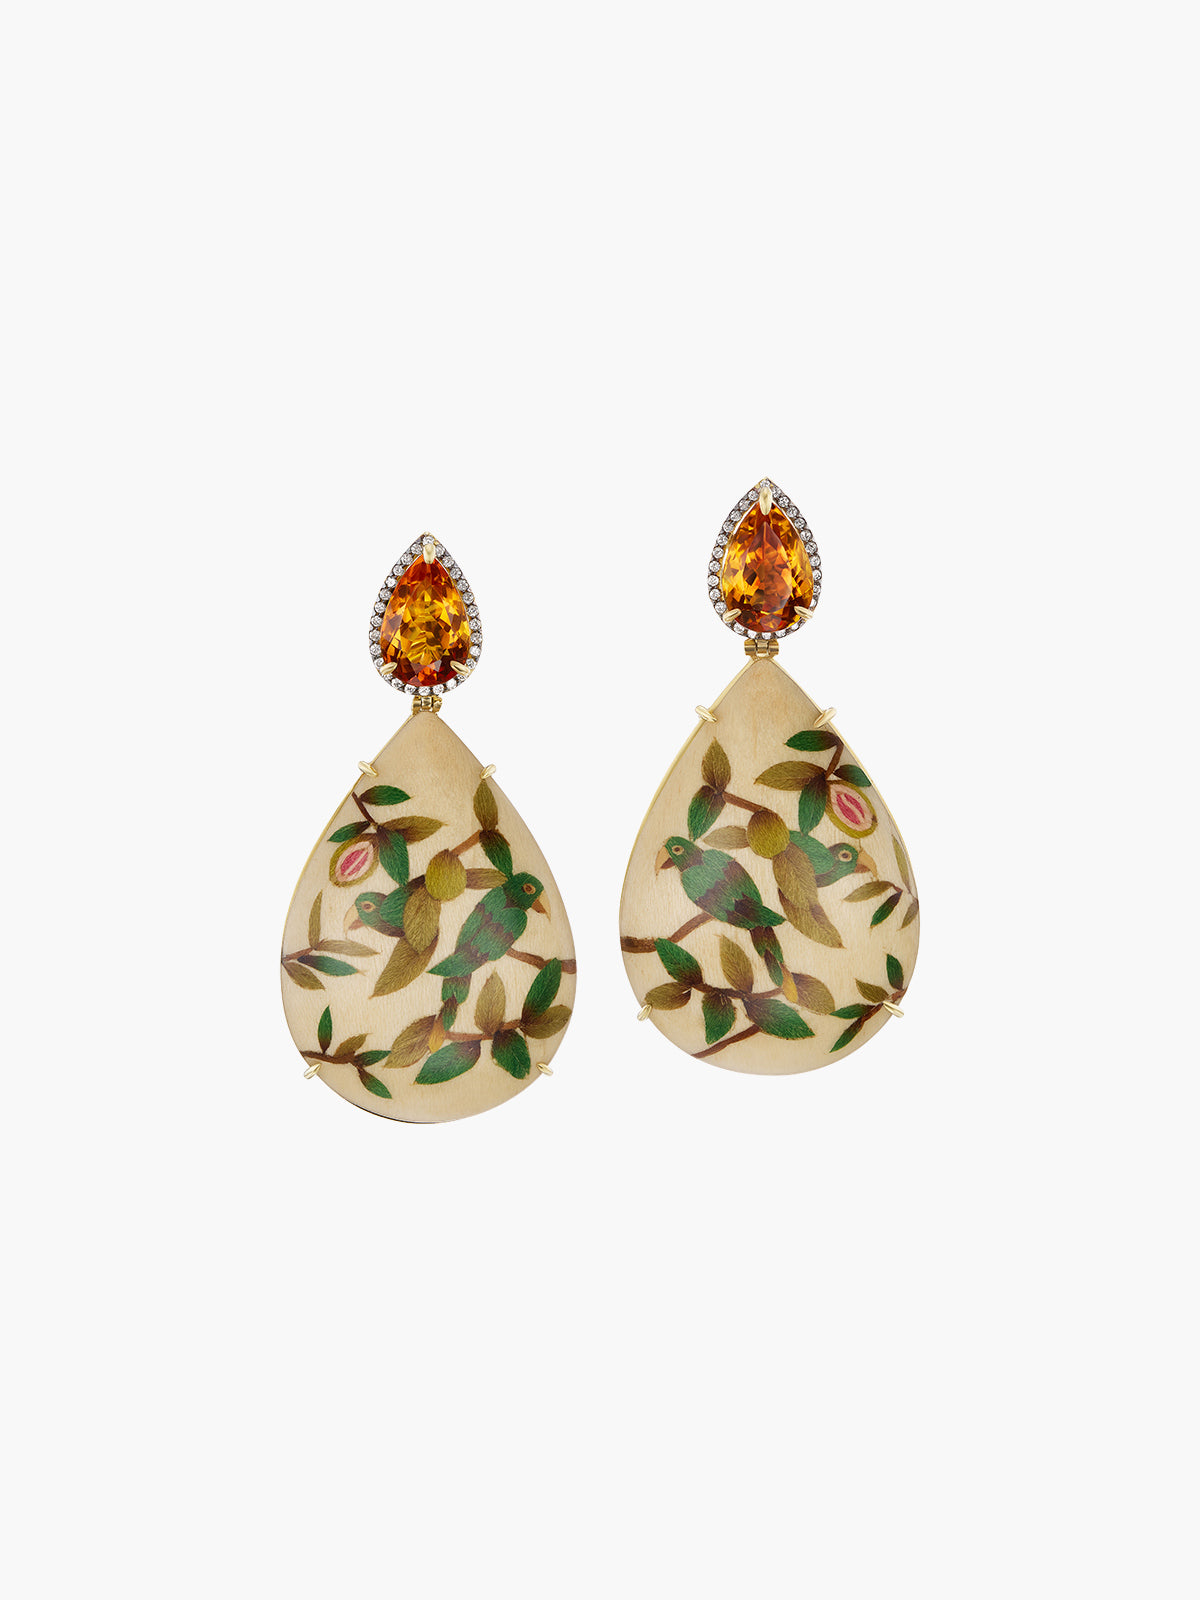 Teardrop Marquetry Earrings | Guava and Parrot on Cream with Citrine & Diamonds